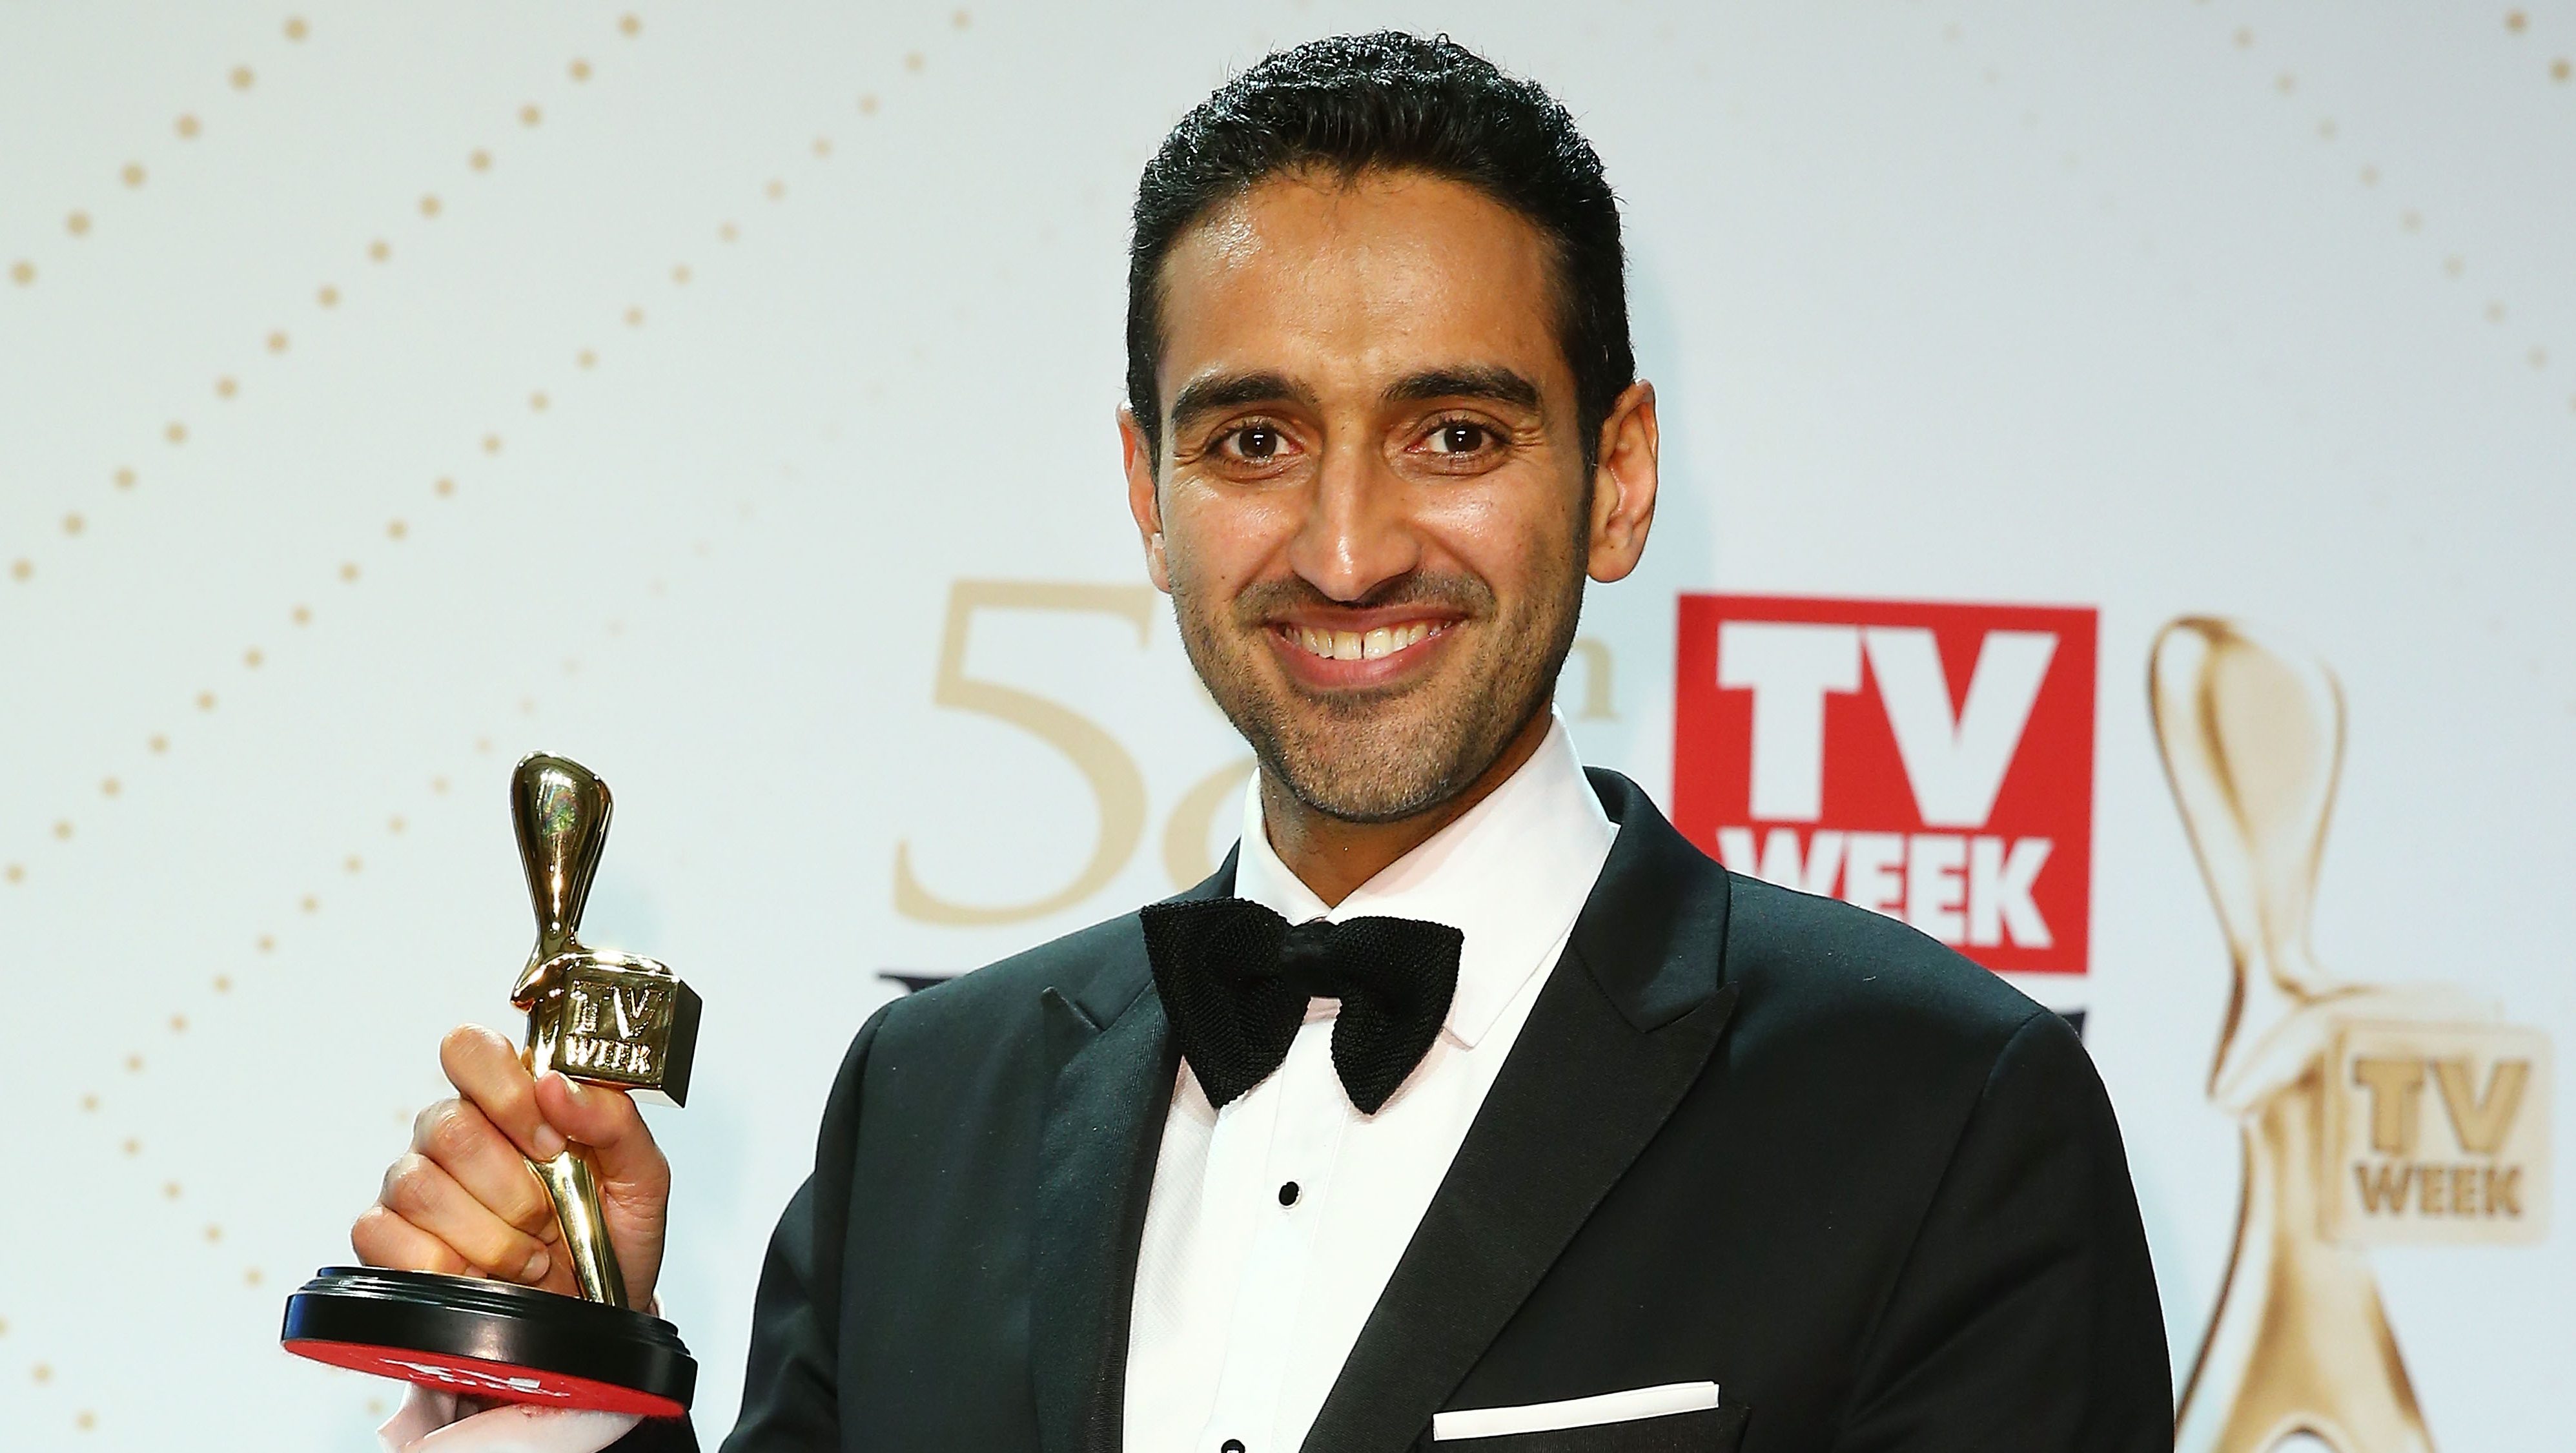 waleed-aly-australian-muslim-reporter-for-the-project-heavy